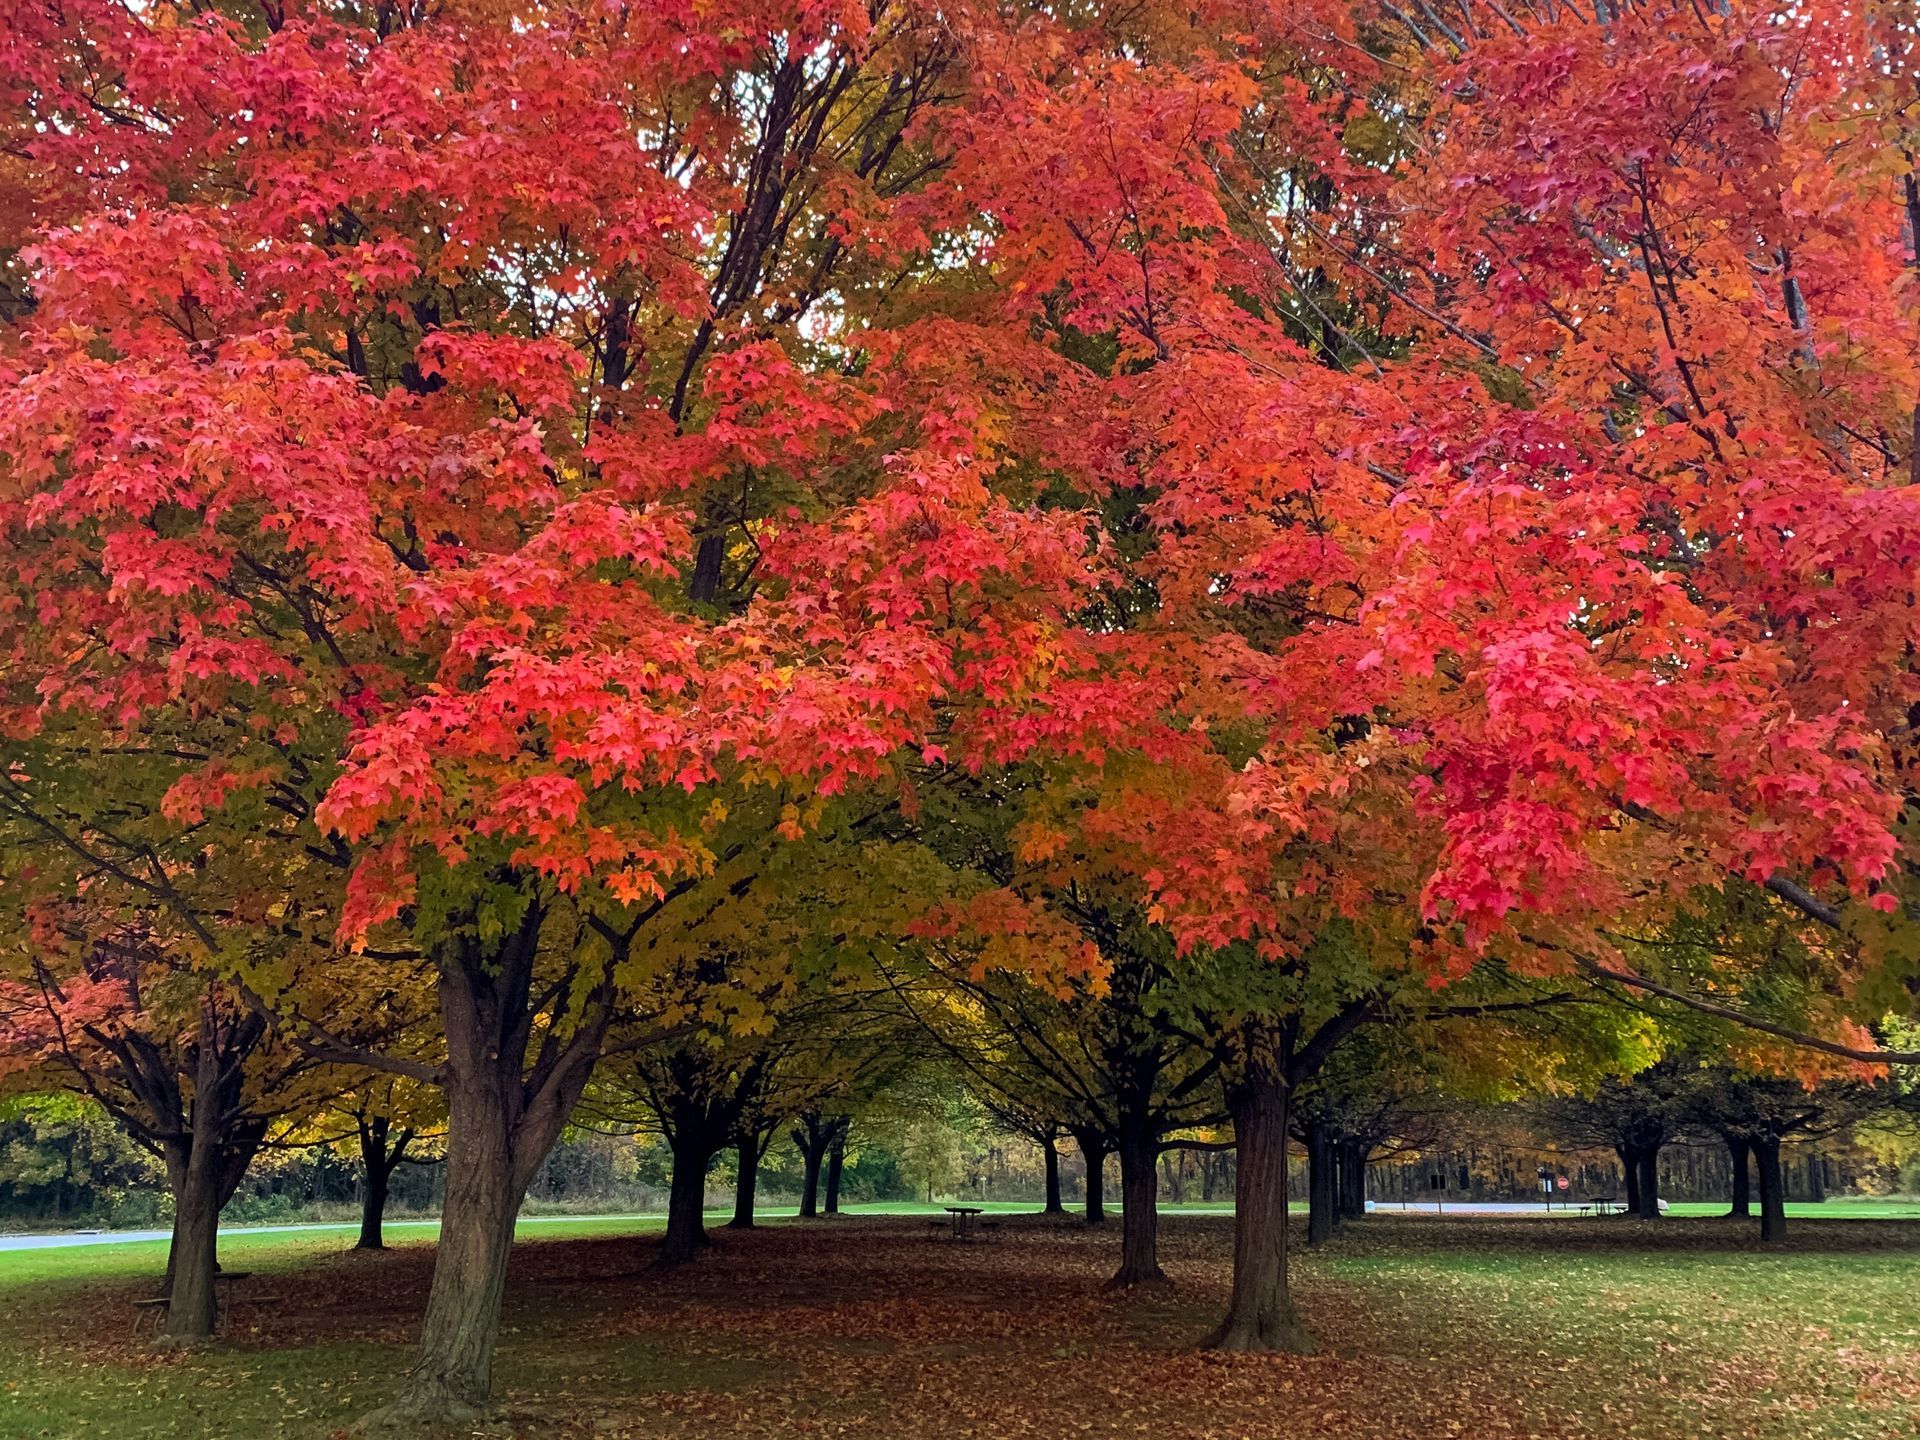 Maple trees in full color, a seasonal delight.